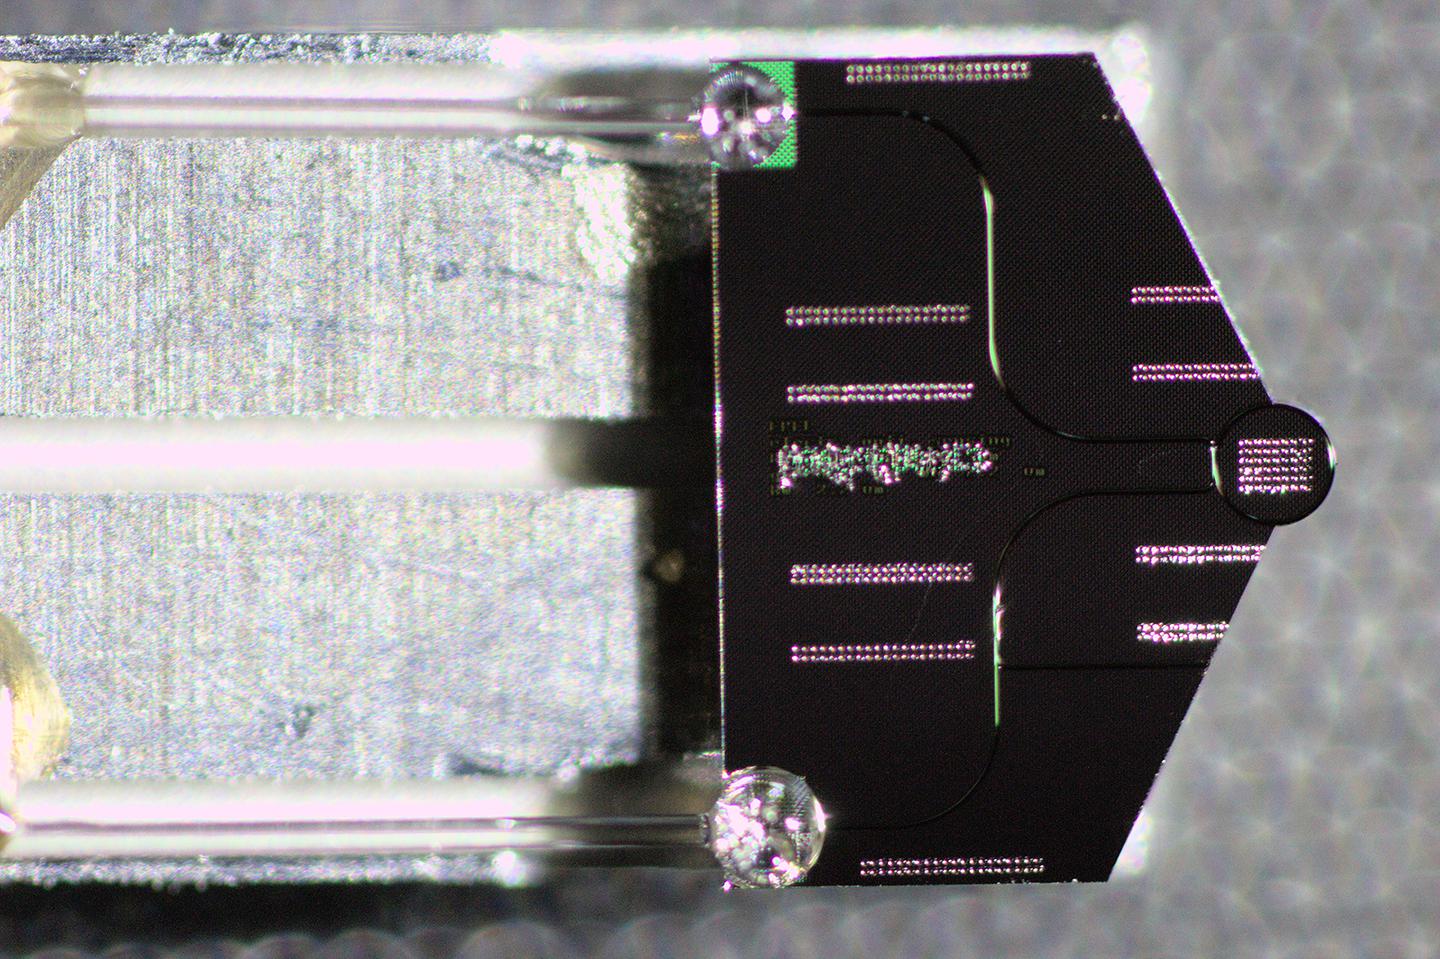 Photonic chip used in this study, mounted on a transmission electron microscope sample holder and packaged with optical fibers